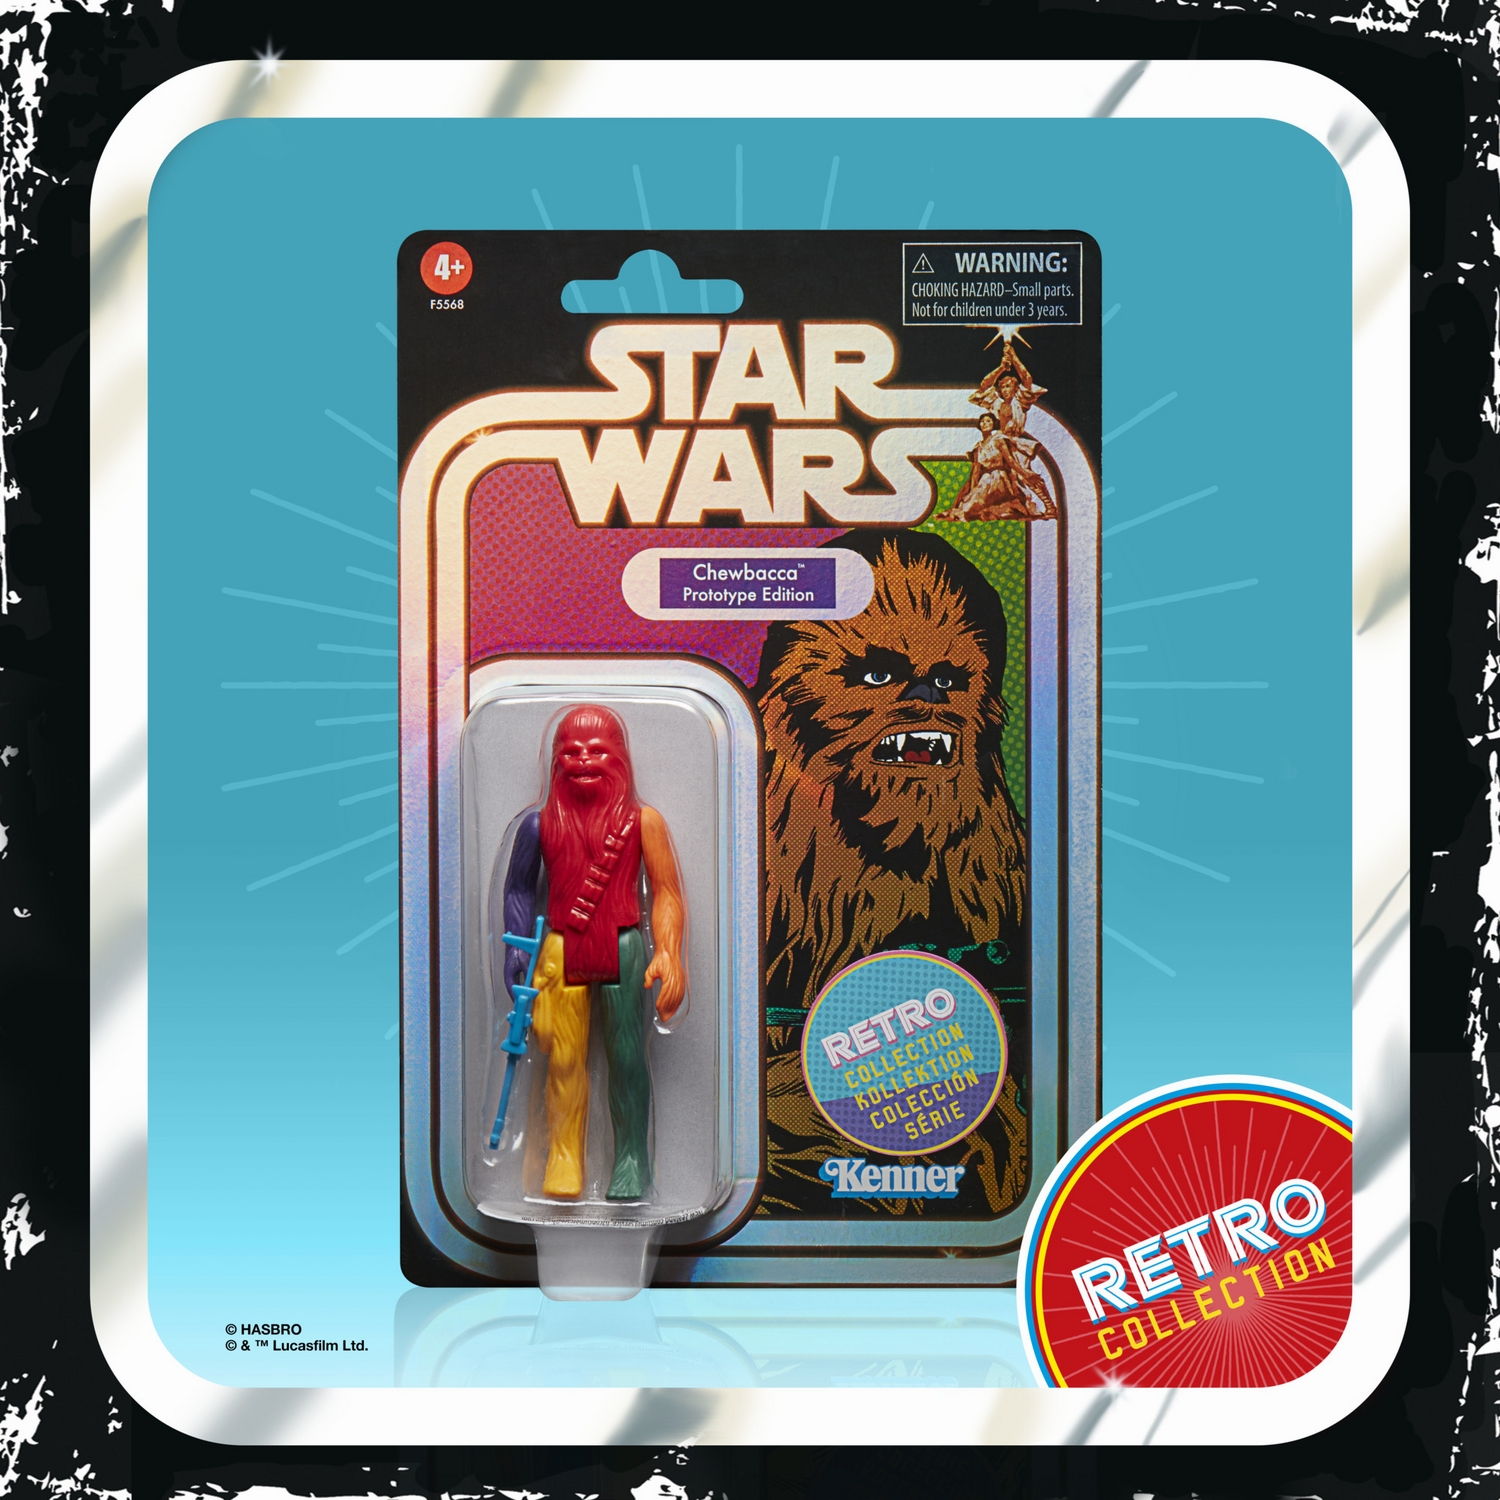 STAR WARS RETRO COLLECTION 3.75-INCH CHEWBACCA PROTOTYPE EDITION Figure (Package).jpg